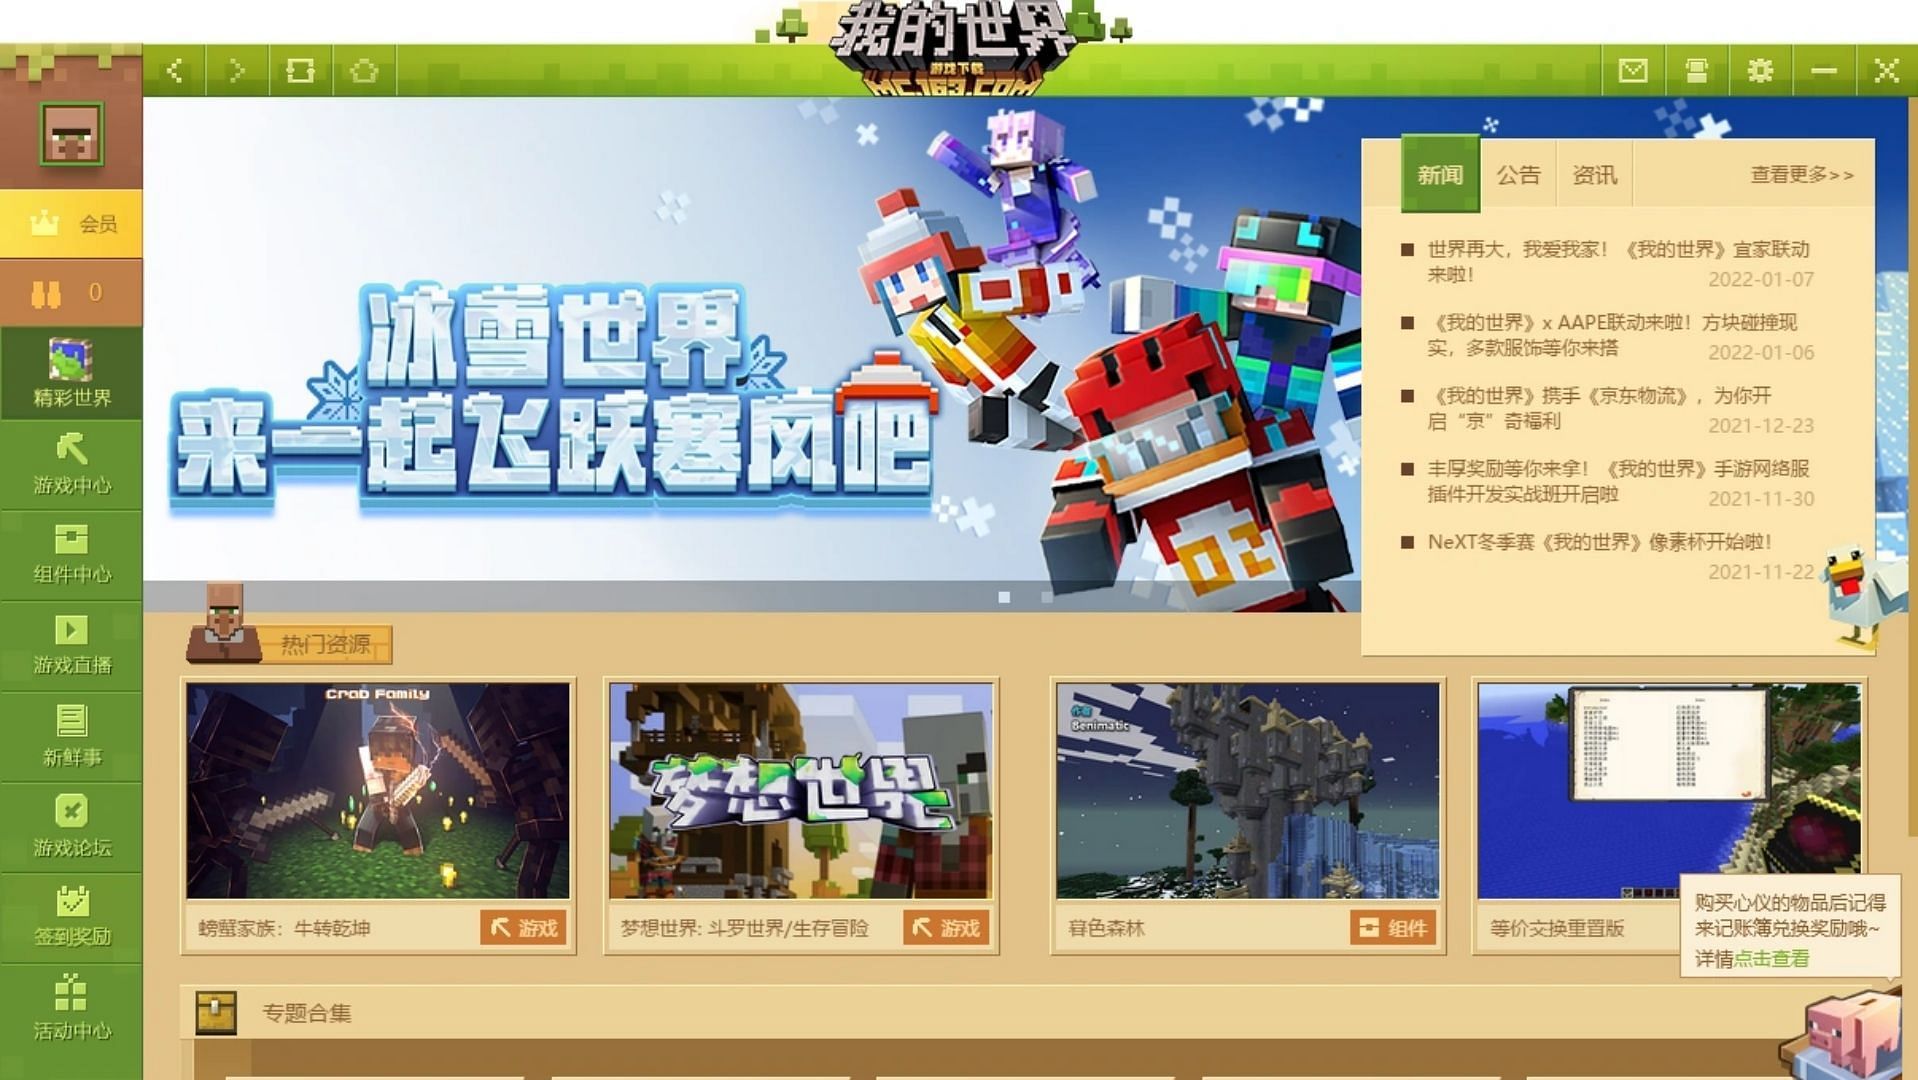 There are several restrictions in the Minecraft China Edition (Image via Minecraft Fandom/Anterdc99)